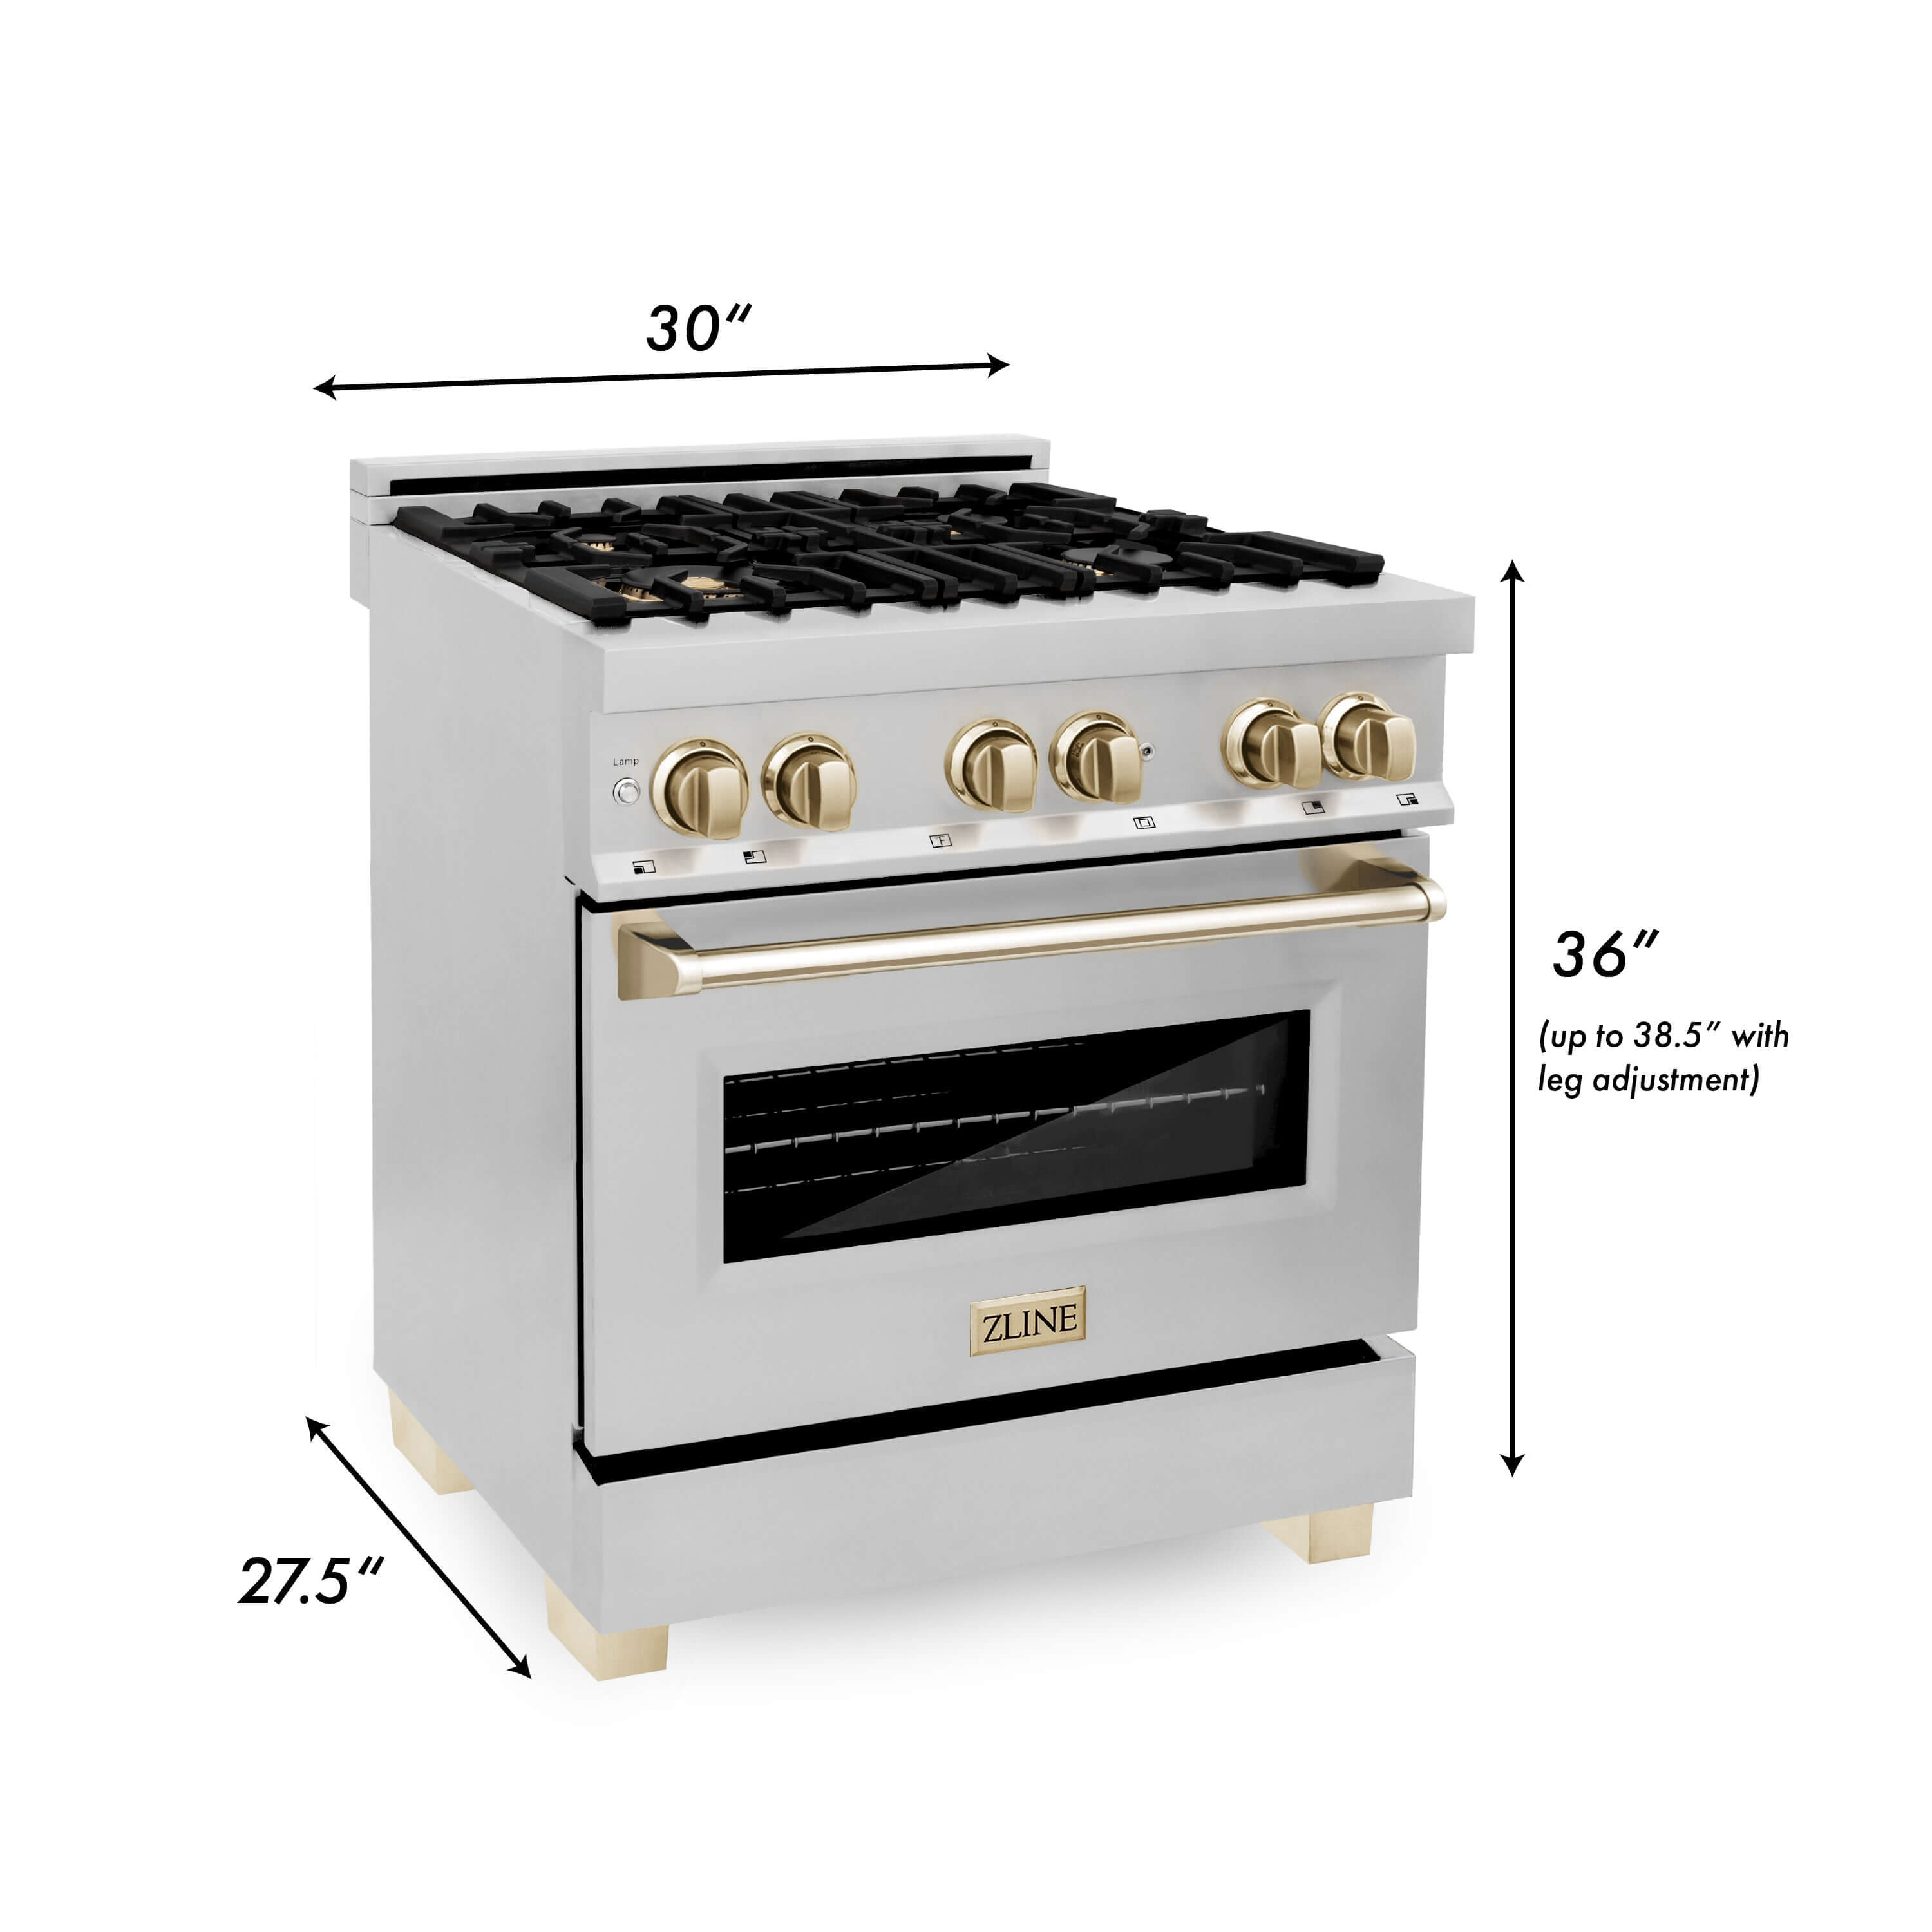 ZLINE Autograph Edition 30 in. Kitchen Package with Stainless Steel Dual Fuel Range, Range Hood, Dishwasher and French Door Refrigerator with Polished Gold Accents (4KAPR-RARHDWM30-G) dimensional diagram with measurements.